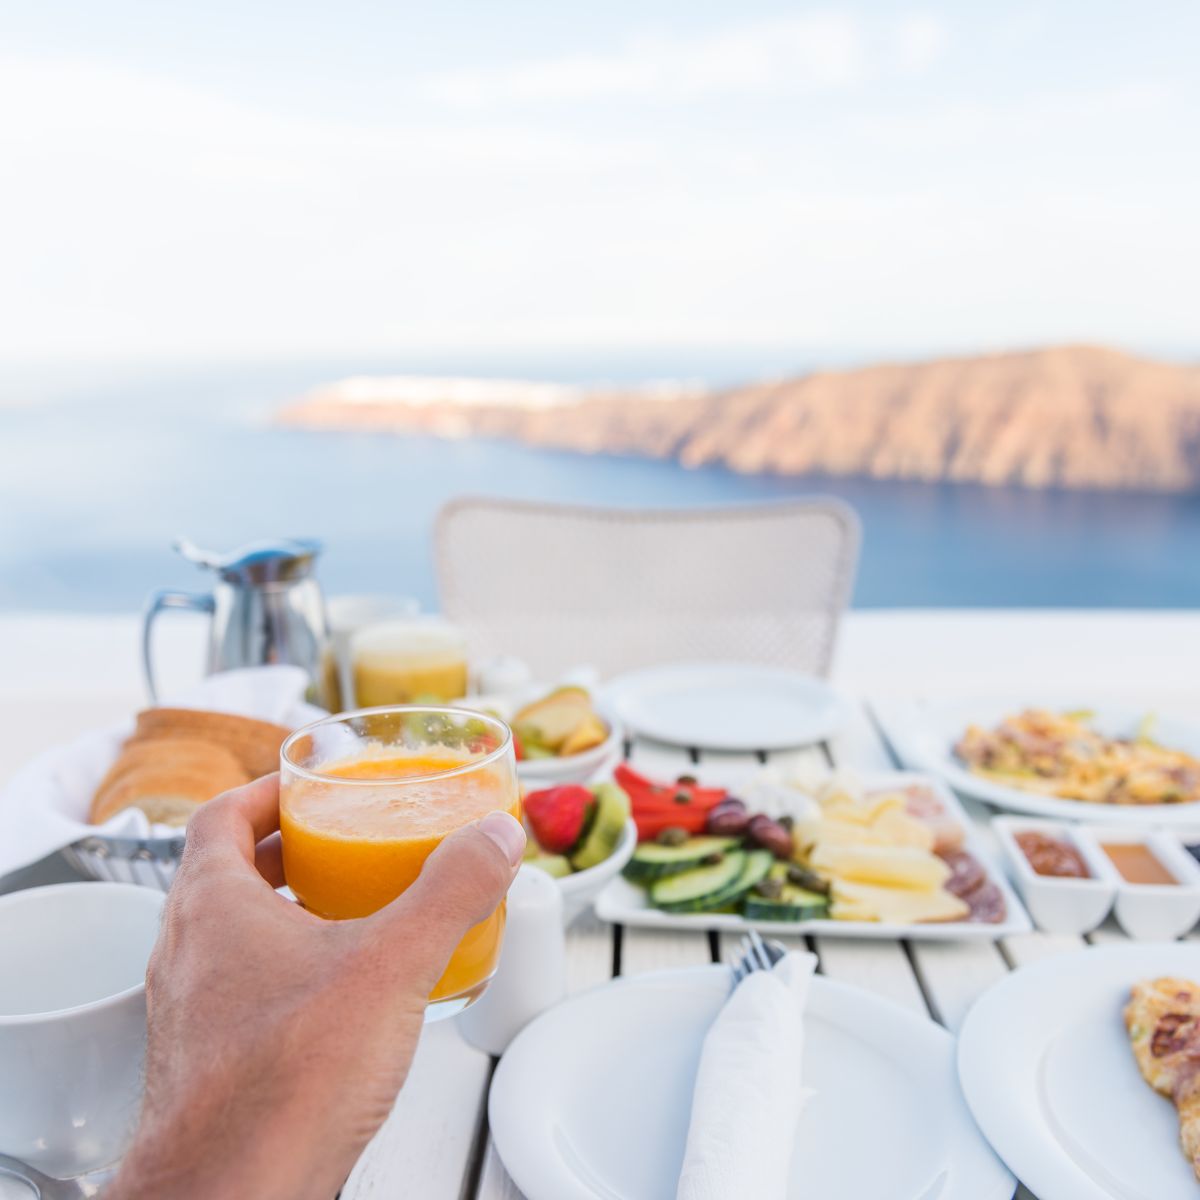 a hand holding a glass of juice over a table of breakfast foods by the ocean